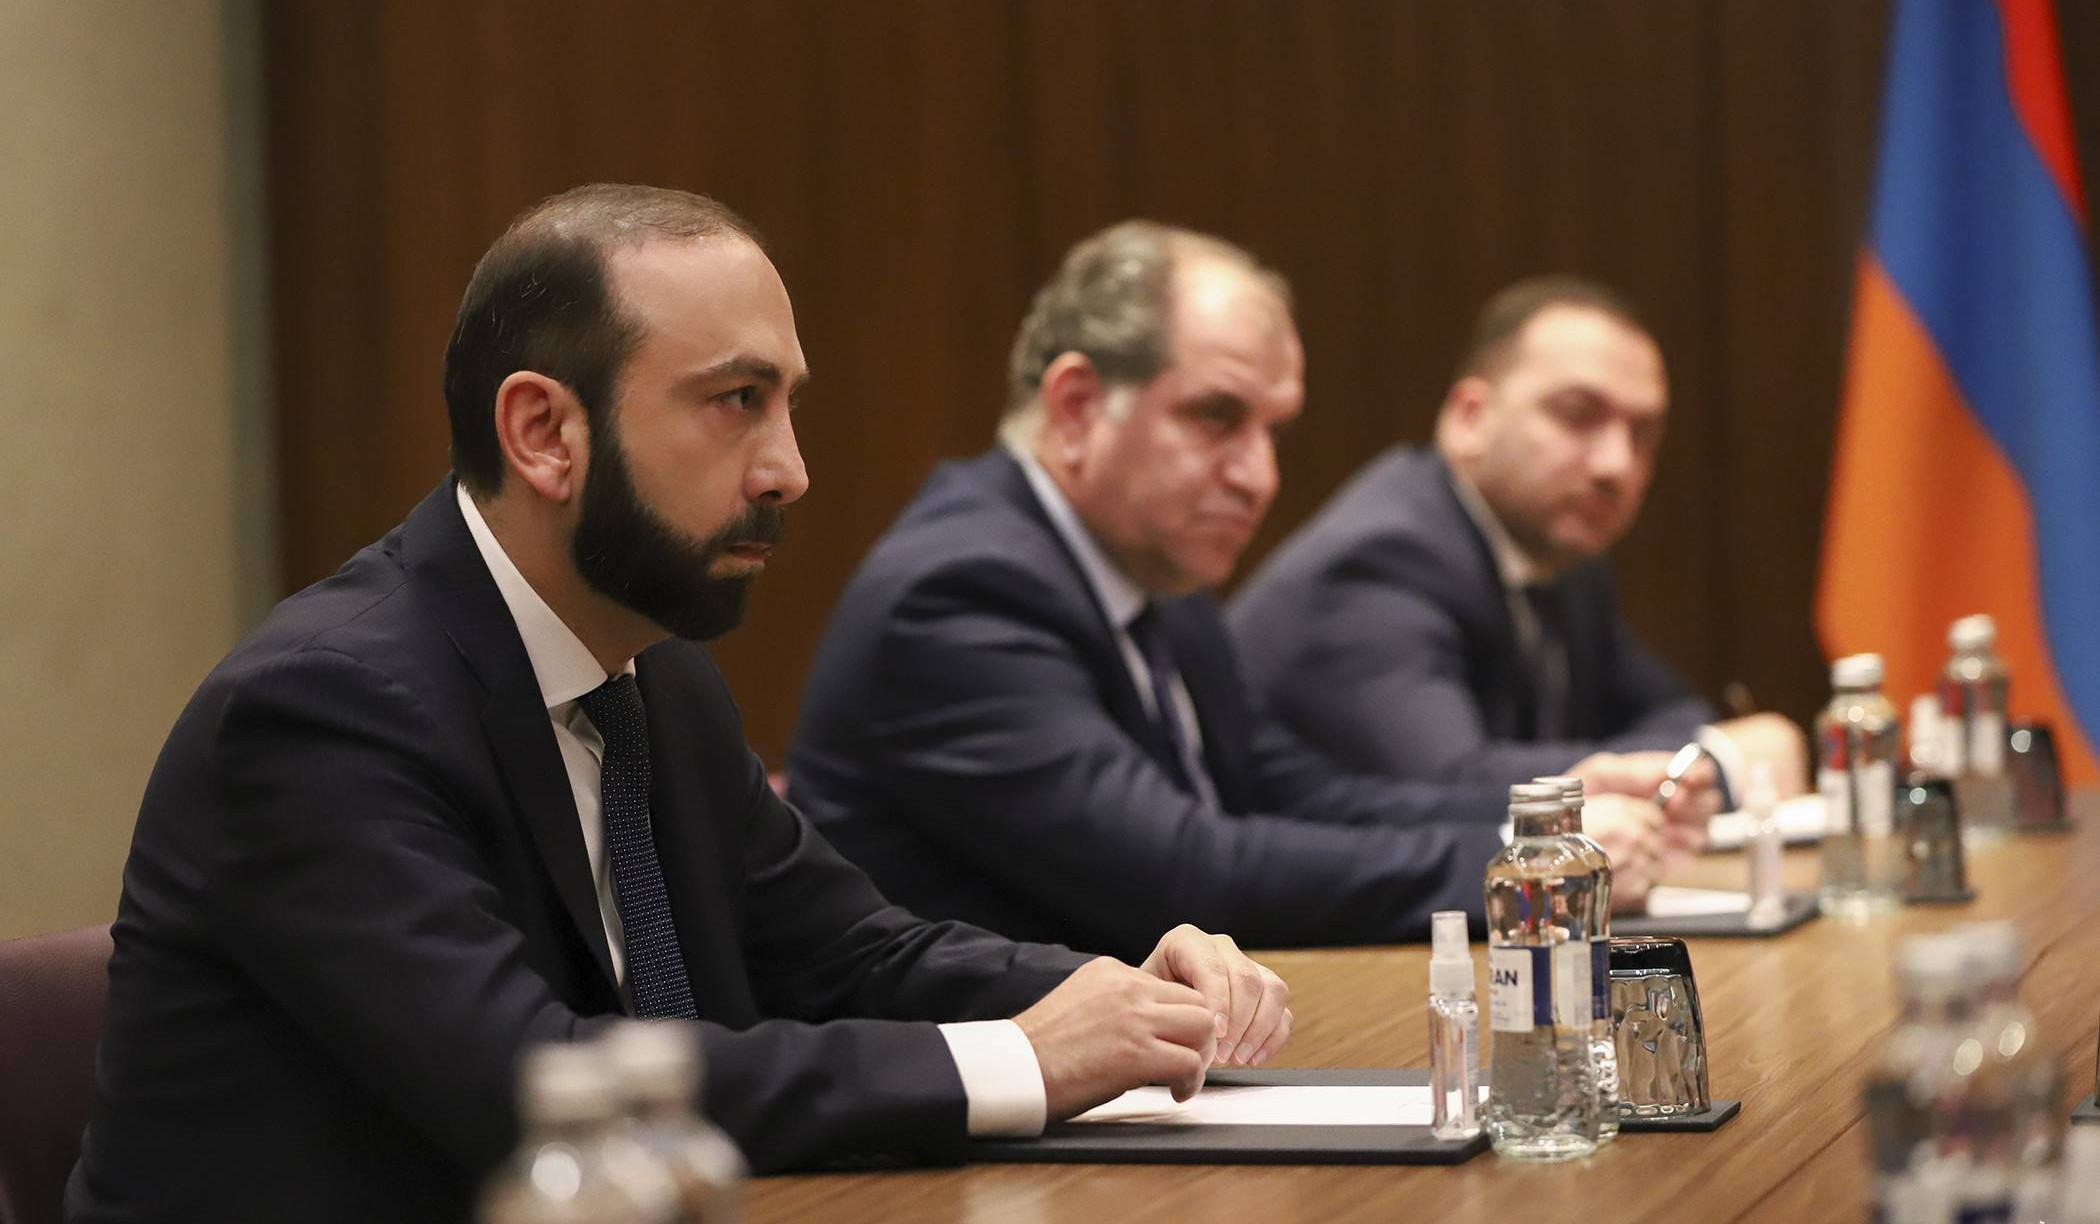 Armenian side expects Russia's unequivocal position and support in withdrawing Azerbaijani Armed Forces from sovereign territory of Armenia: Mirzoyan